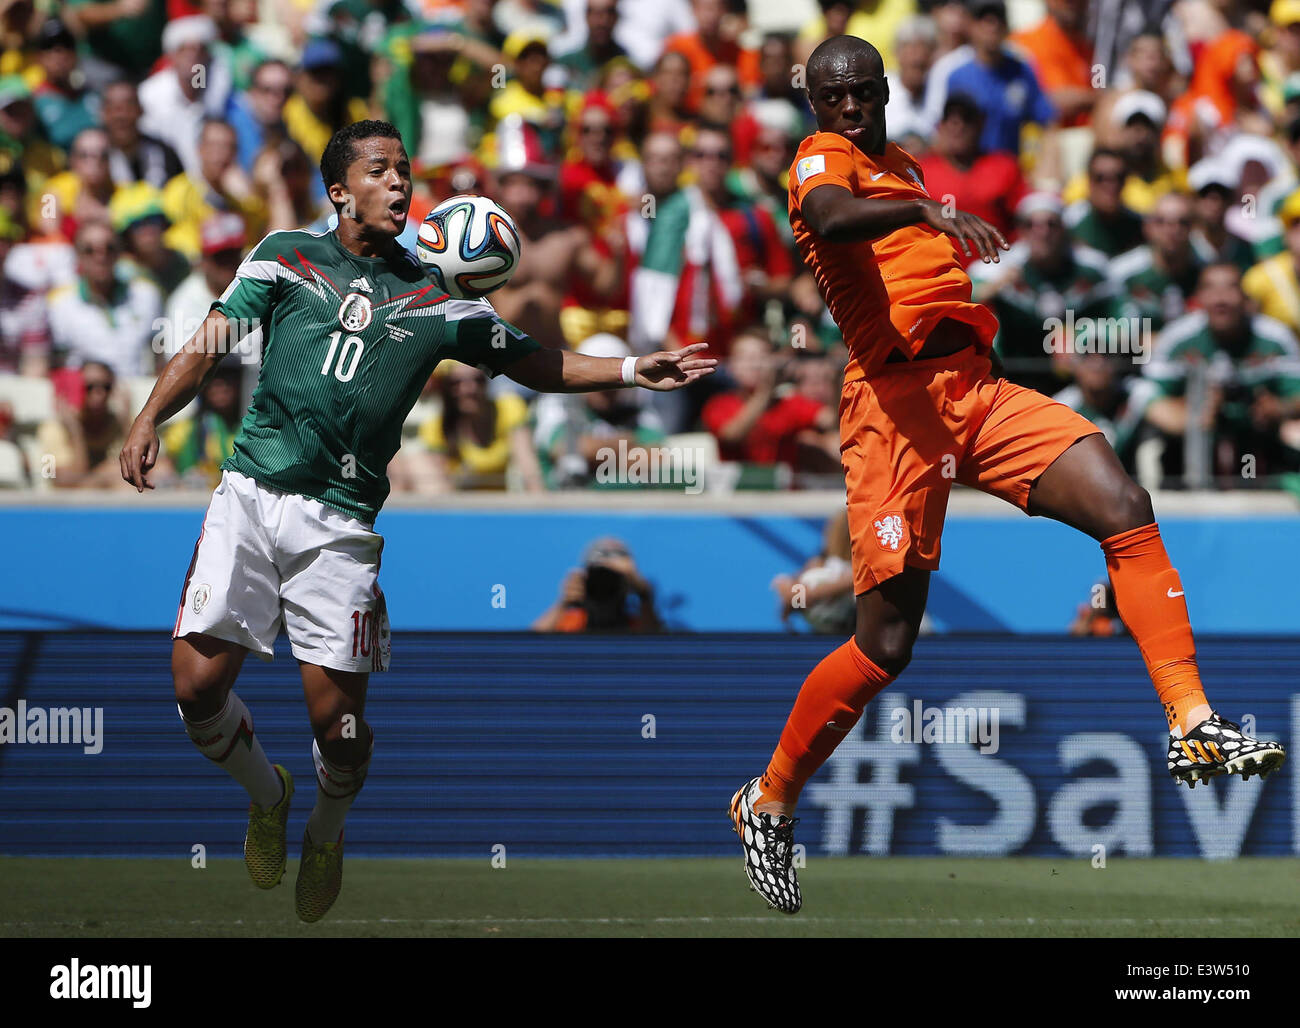 Fortaleza, Brazil. 29th June, 2014. Mexico's Giovani dos Santos stops the ball during a Round of 16 match between Netherlands and Mexico of 2014 FIFA World Cup at the Estadio Castelao Stadium in Fortaleza, Brazil, on June 29, 2014. Credit:  Zhou Lei/Xinhua/Alamy Live News Stock Photo